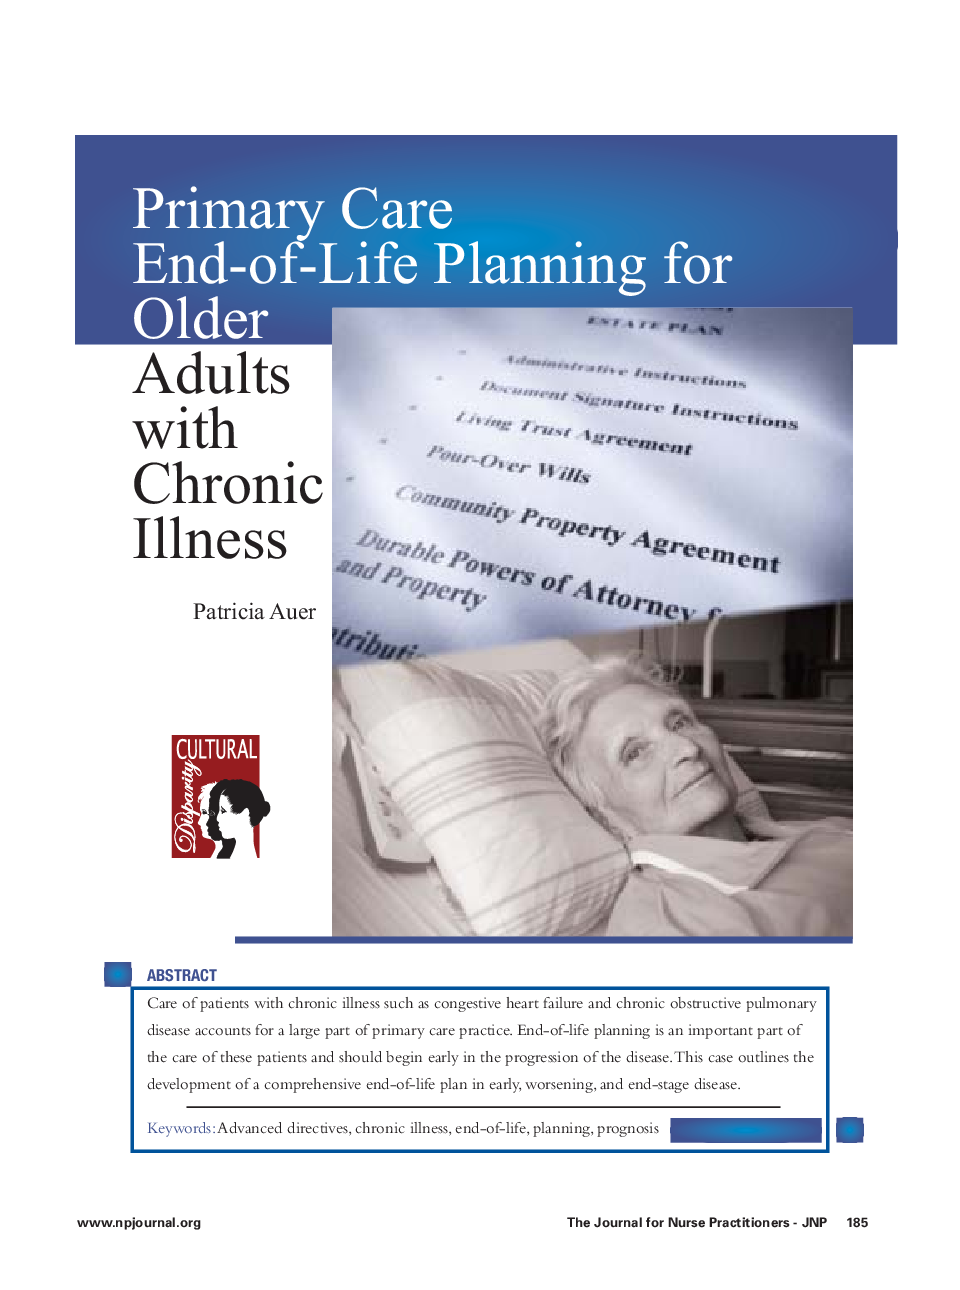 Primary Care End-of-Life Planning for Older: Adults with Chronic Illness